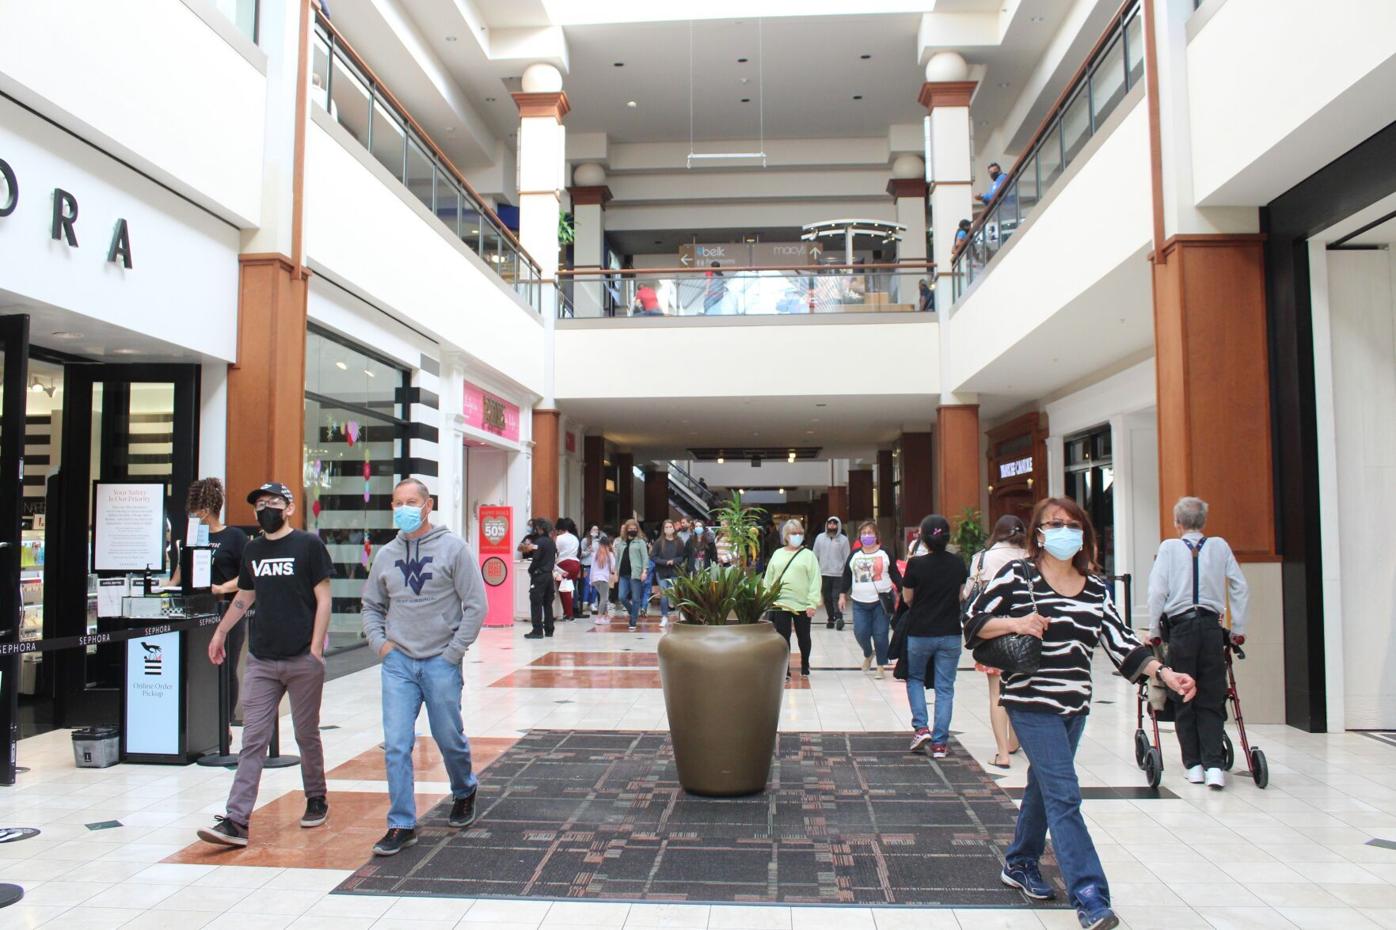 A fresh start': mall manager on future of Town Center at Cobb, News